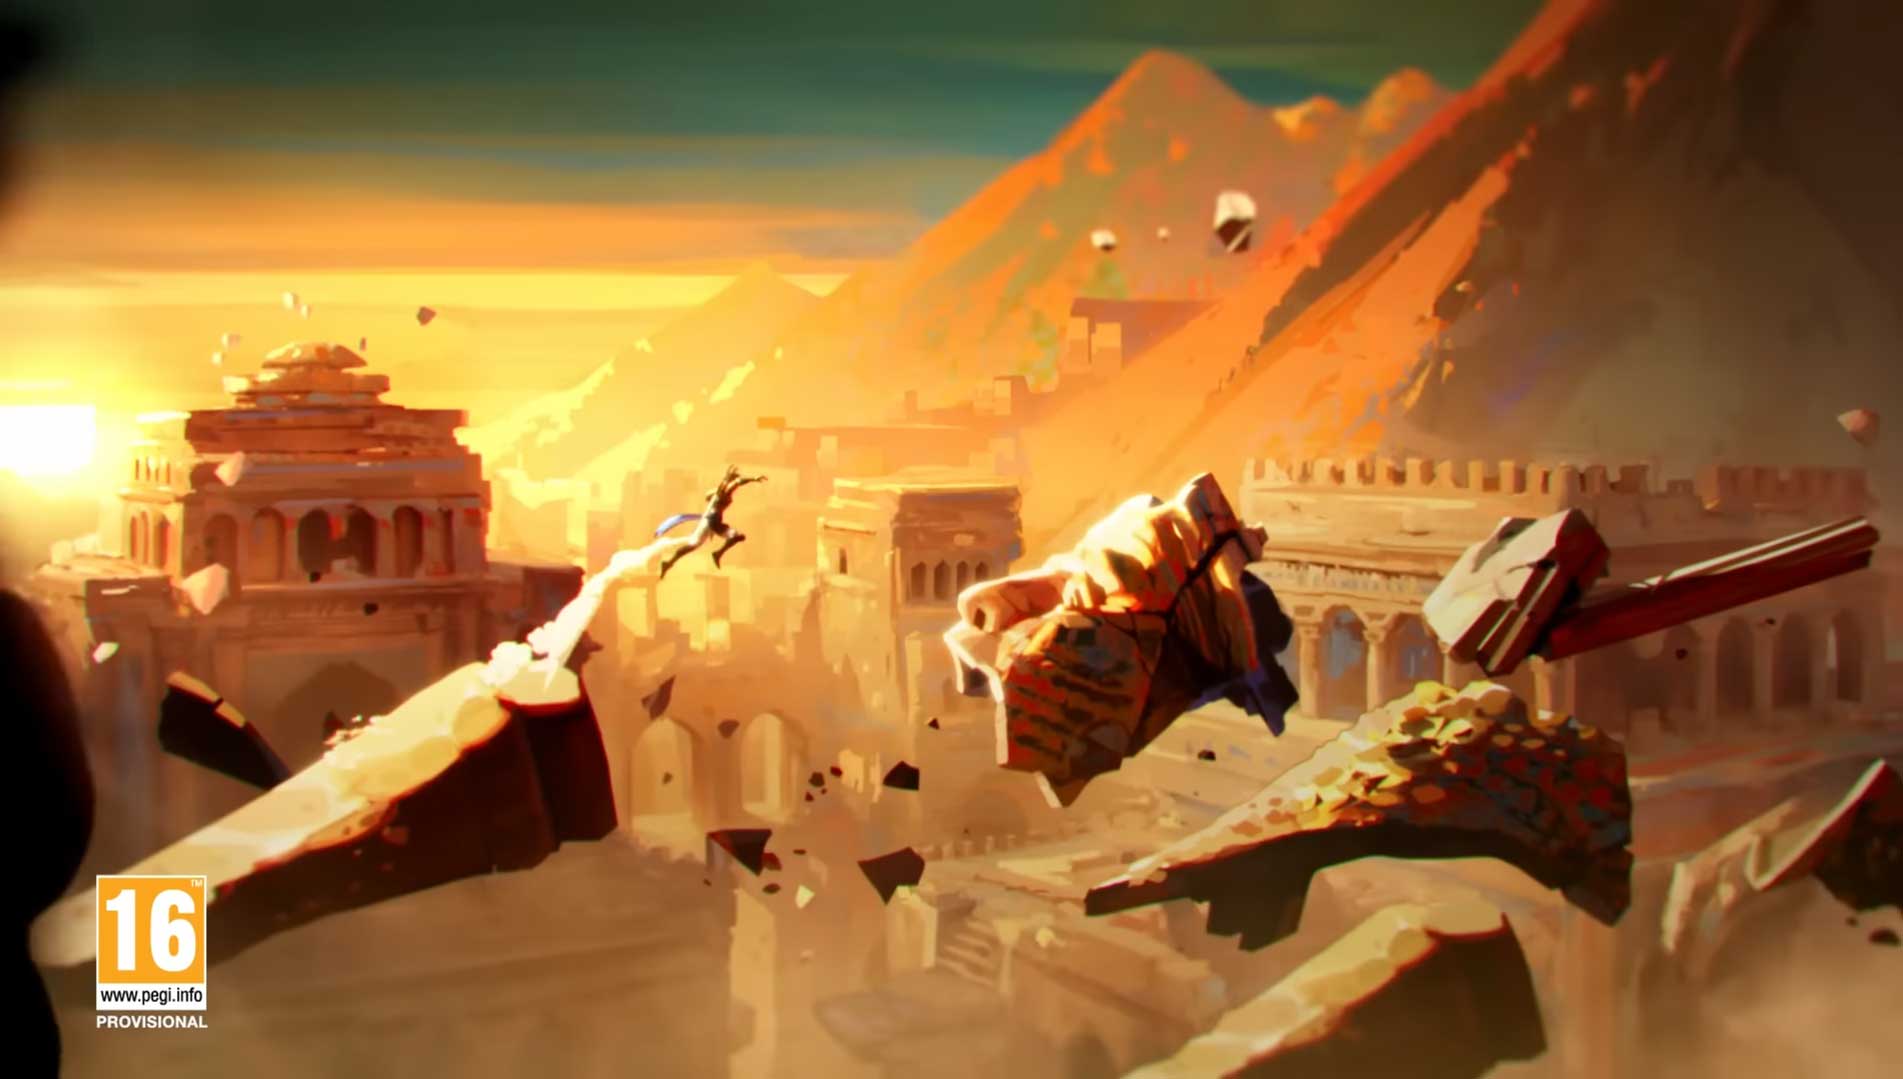 Prince of Persia: The Lost Crown - Reveal Trailer